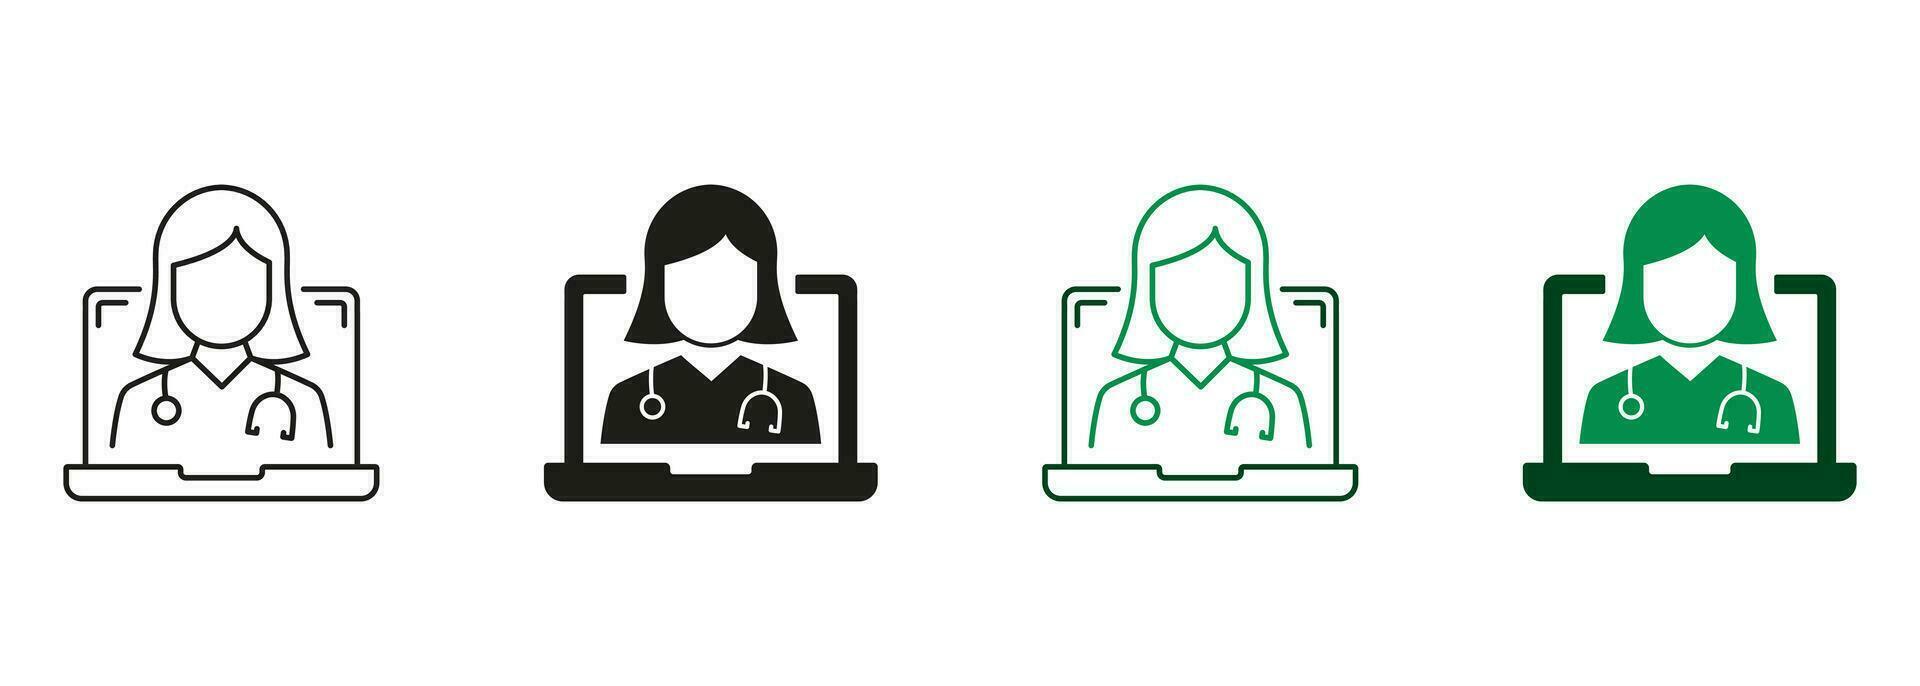 Online Remote Healthcare Pictogram. Online Digital Medicine Line and Silhouette Icon Set. Virtual Medical Service, Telemedicine Symbol Collection. Doctor in Computer. Isolated Vector Illustration.